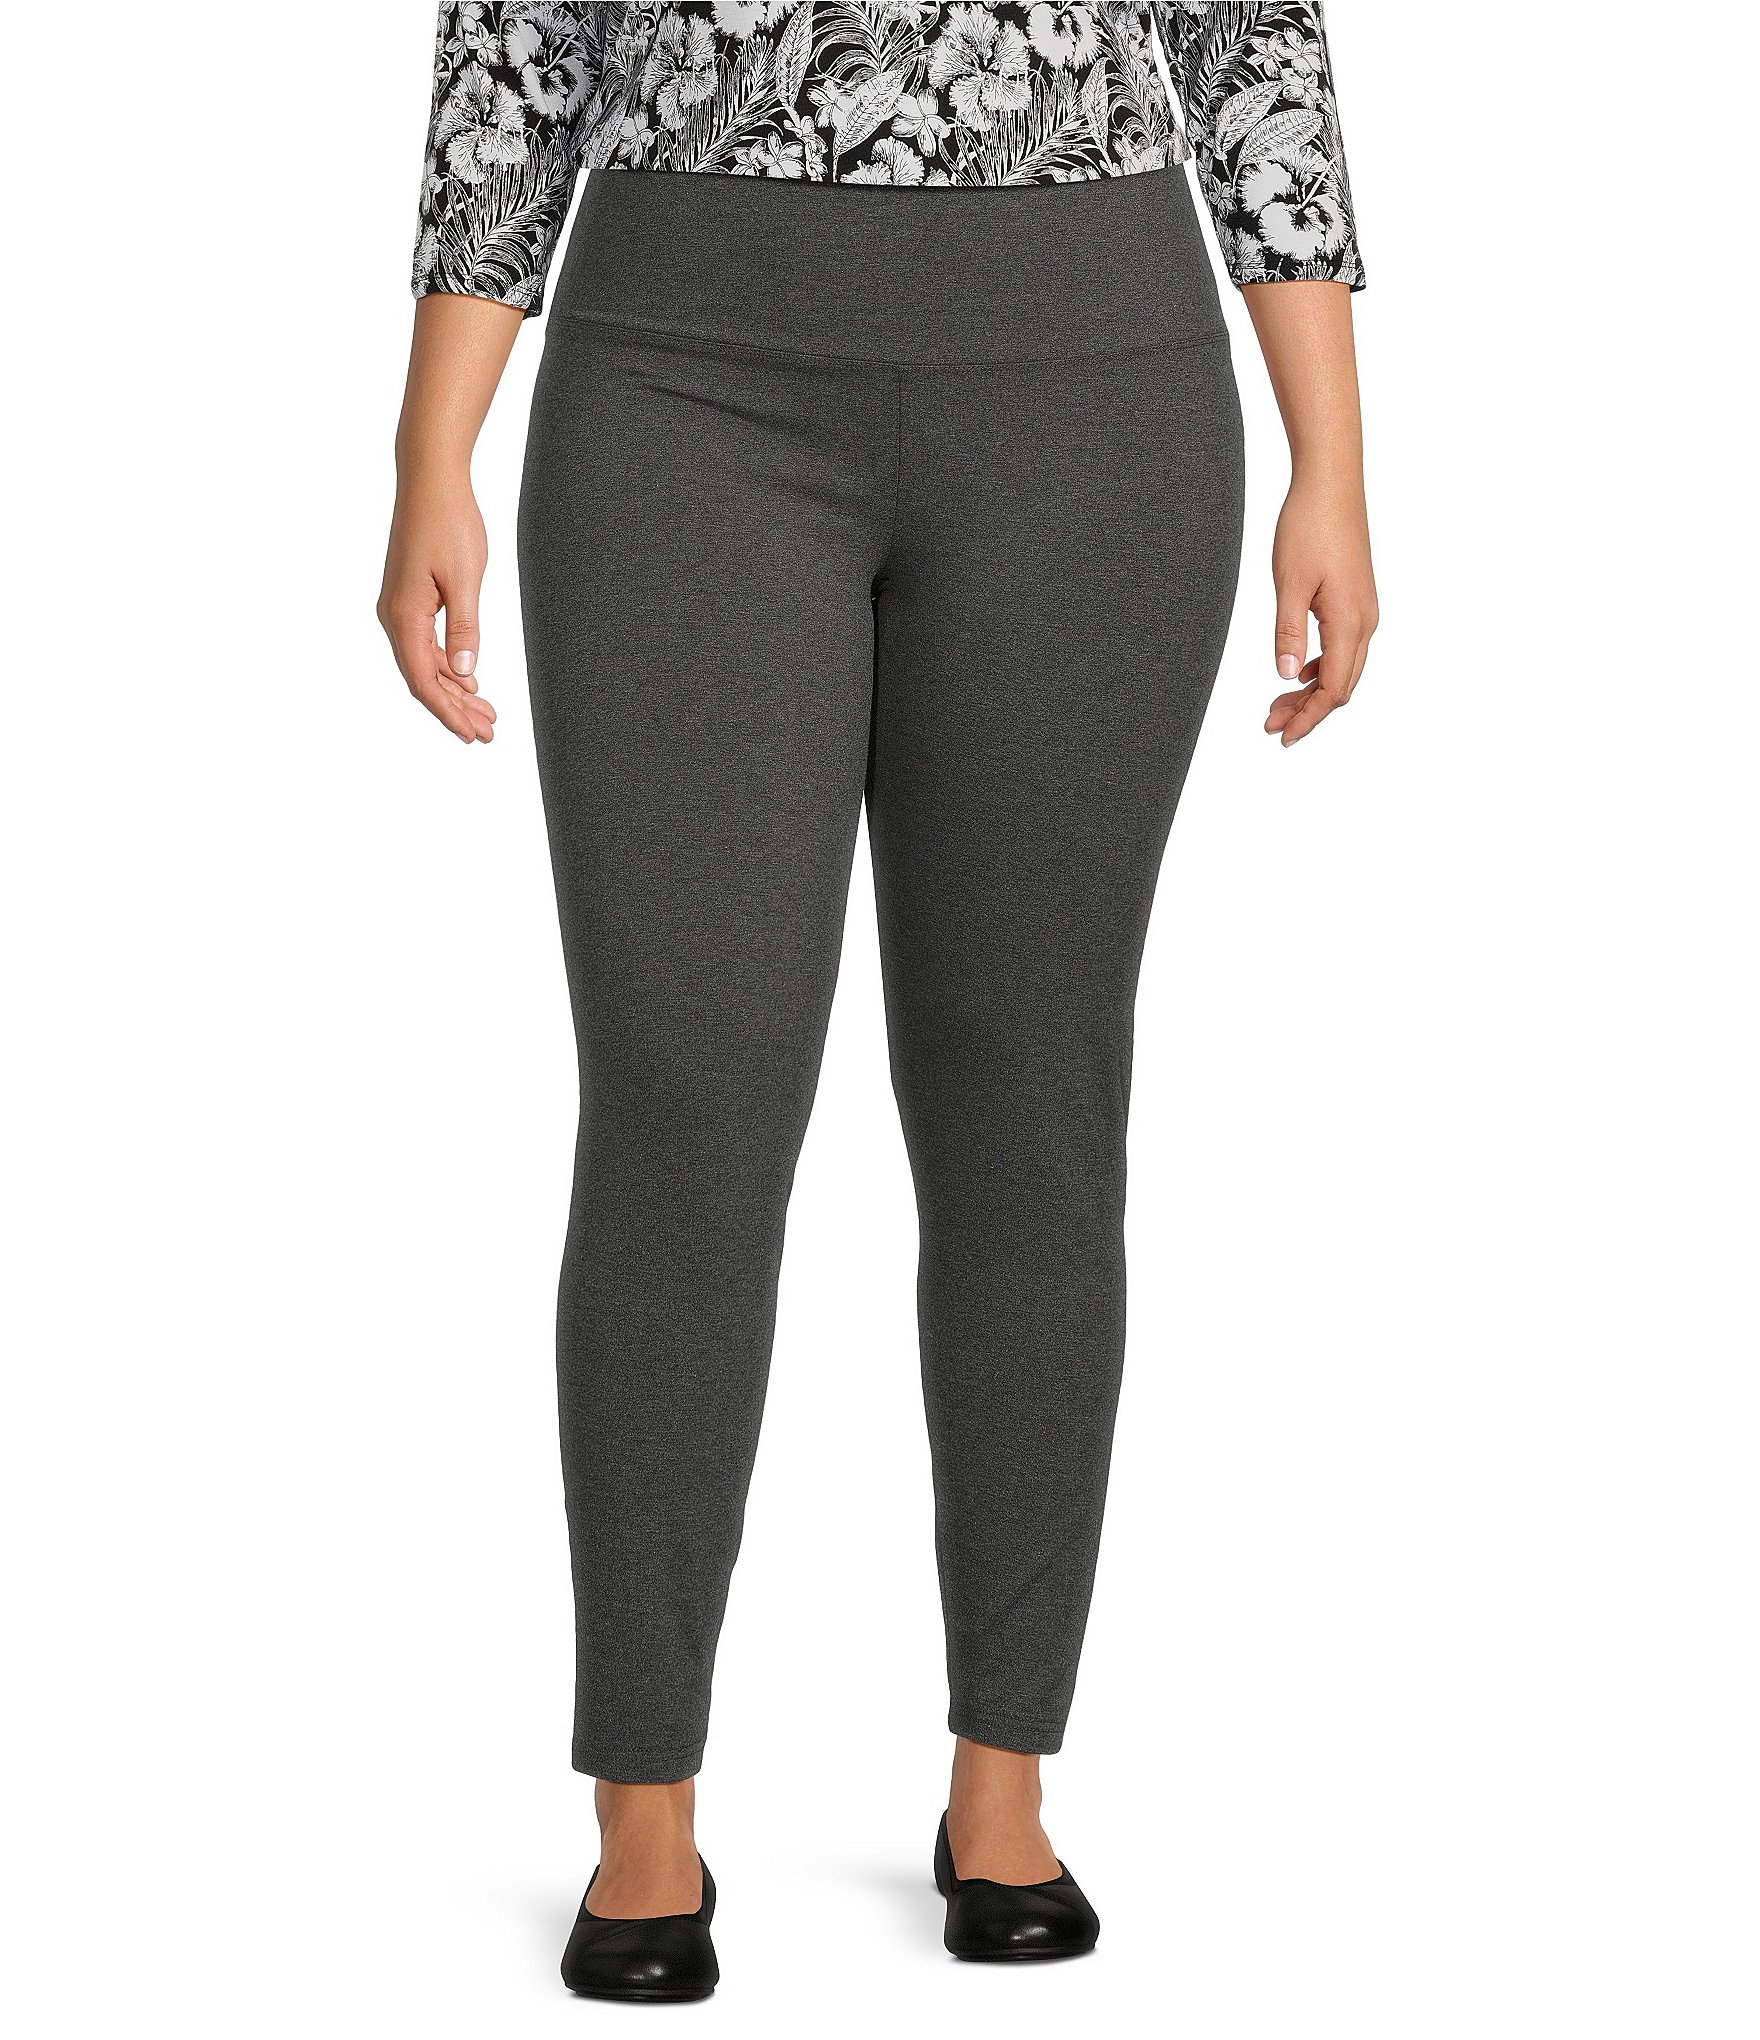 Intro Plus Size Love the Fit Pull-On Leggings, Dillard's